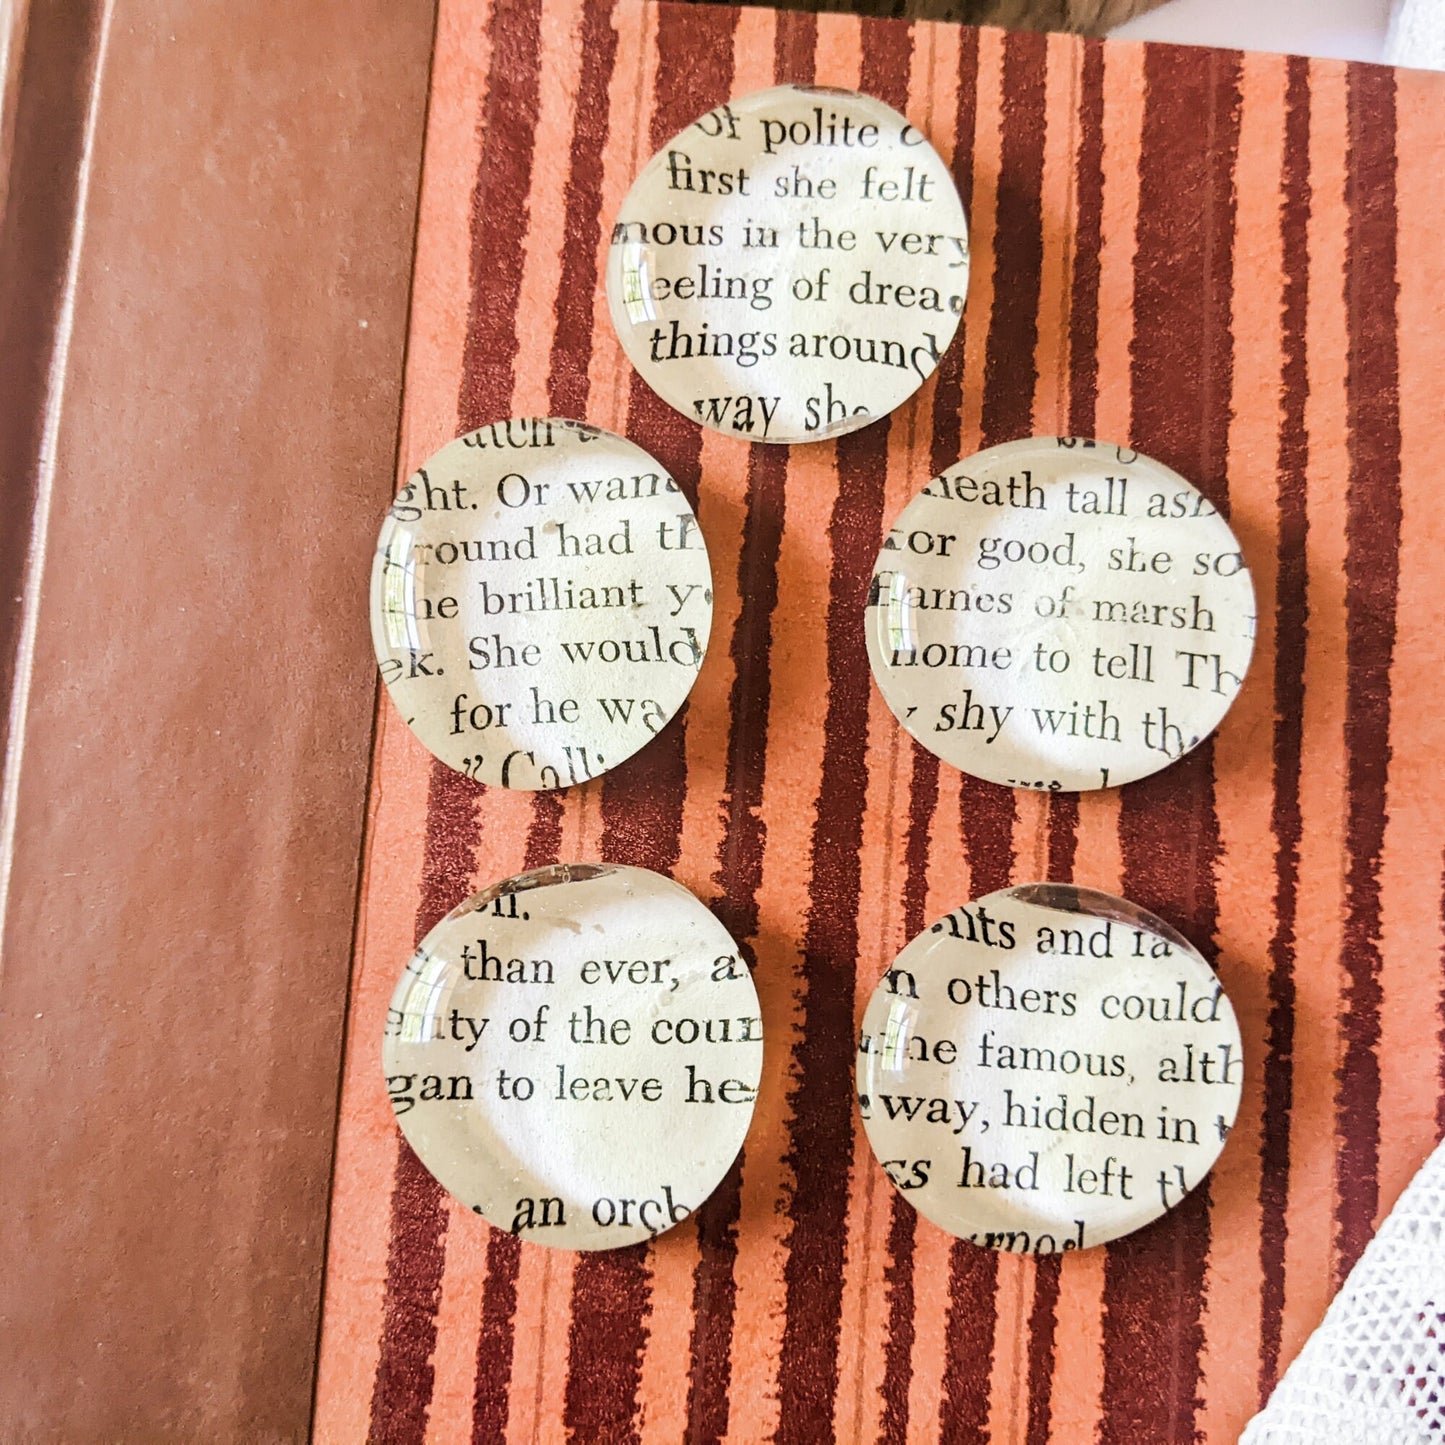 Book Page Glass Magnet - Set of 6